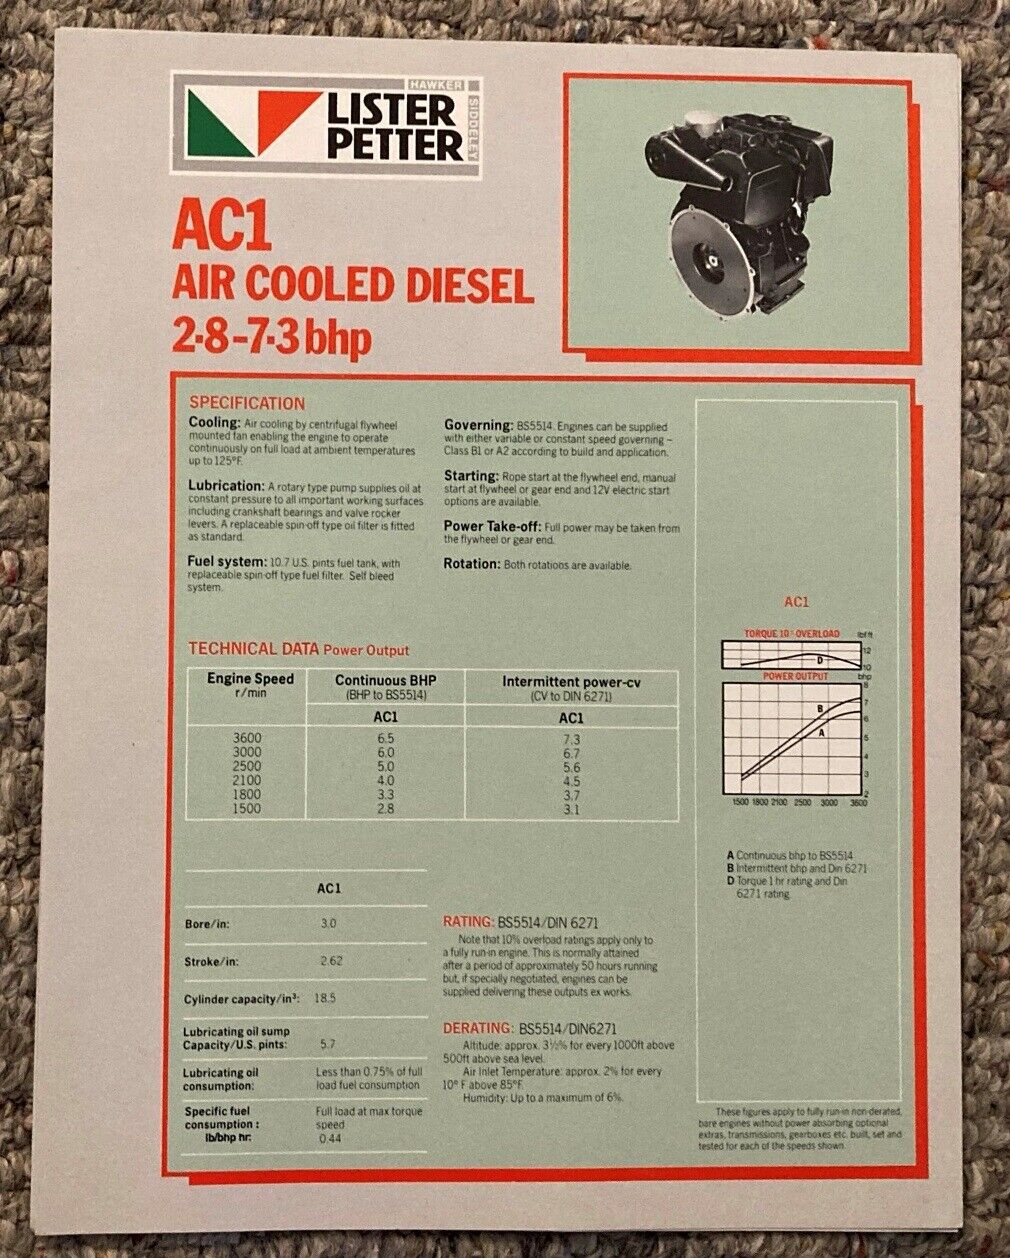 LA156 Lister Petter Diesel Engine AC1 Air Cooled Specification Sheet